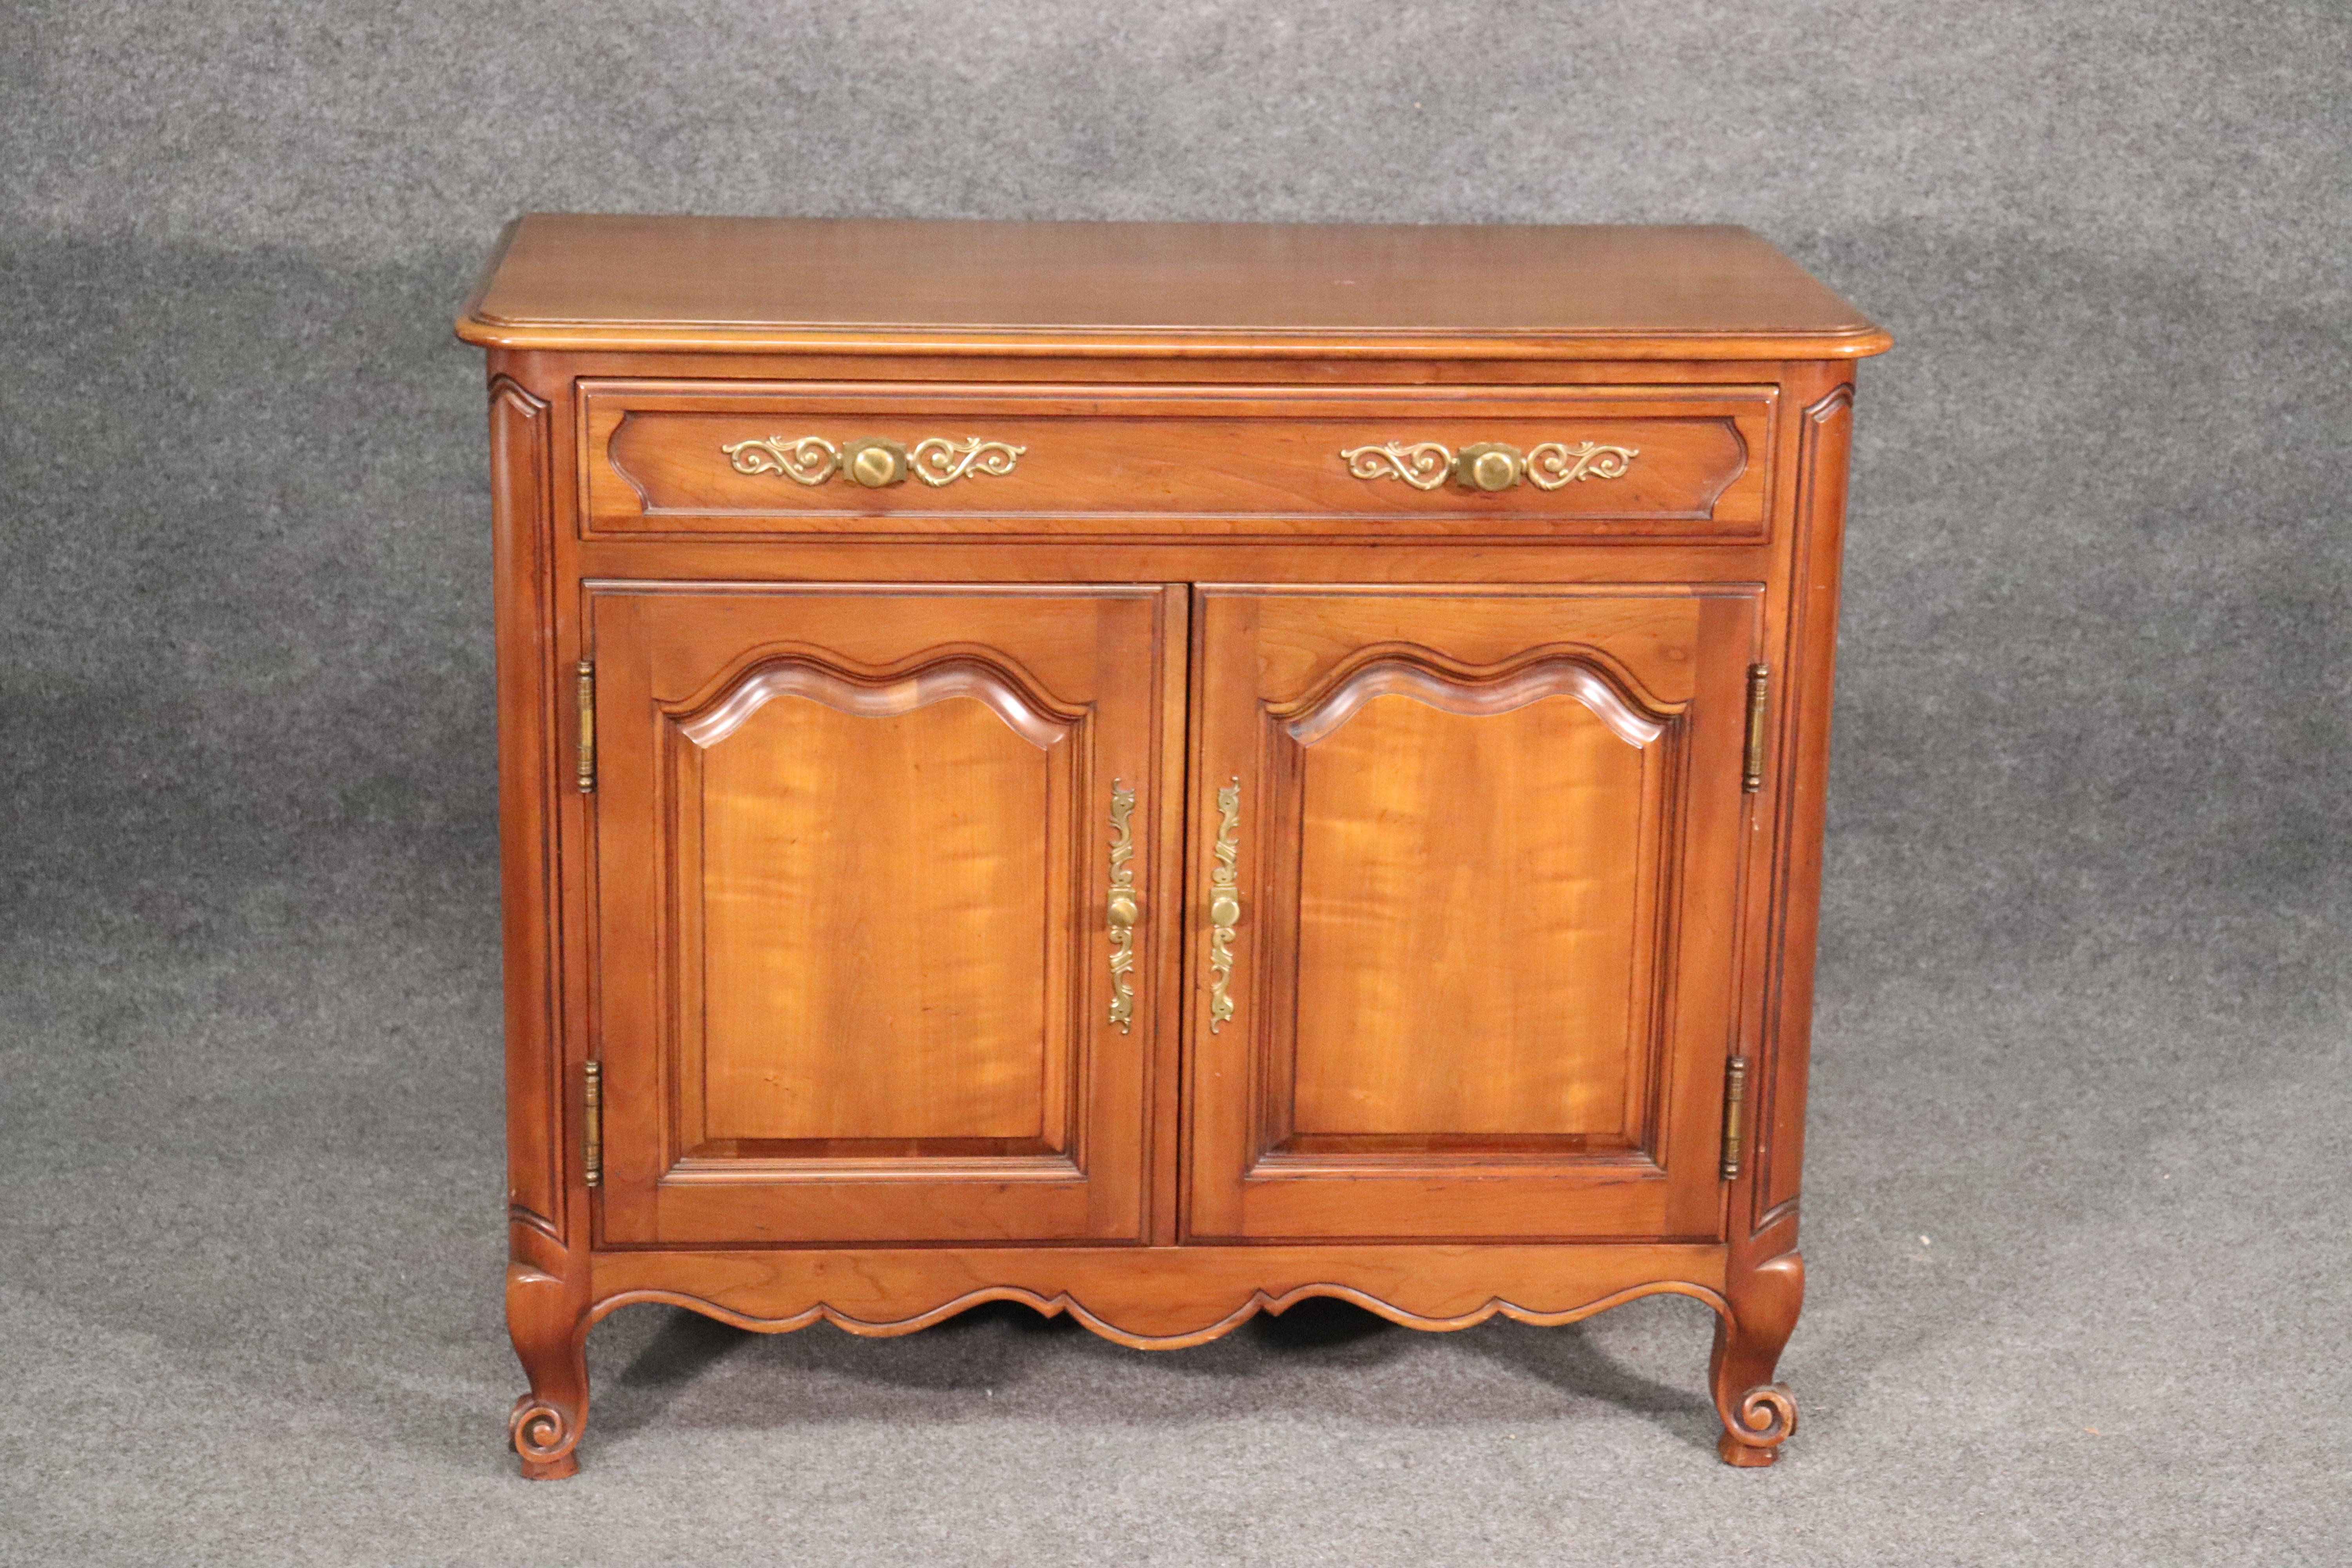 This is a beautiful and extremely high quality buffet from Kindel. This piece features solid cherry and dovetailed construction. The buffet is clean and in good condition and measures 49.75 wide x 19 deep x 34 tall.